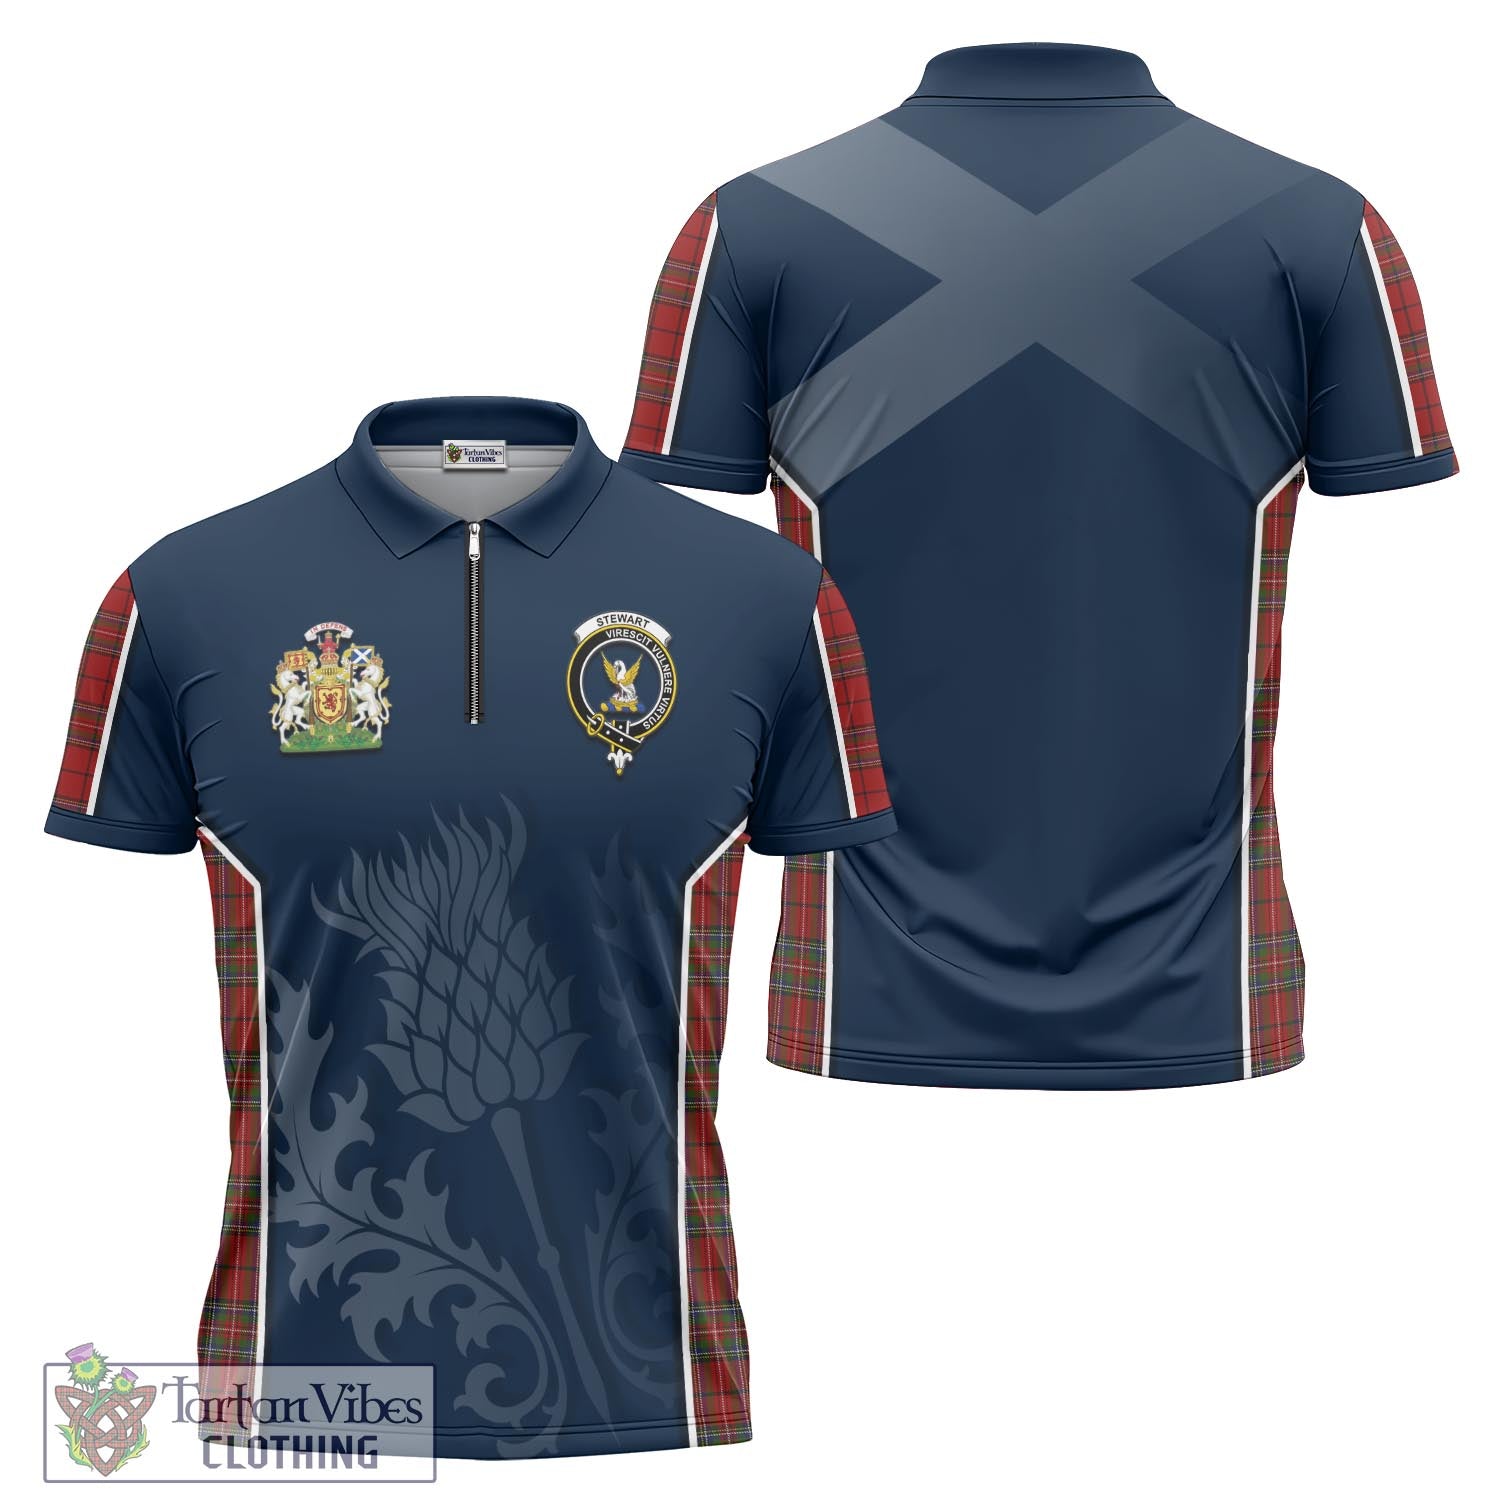 Tartan Vibes Clothing Stewart of Galloway Tartan Zipper Polo Shirt with Family Crest and Scottish Thistle Vibes Sport Style